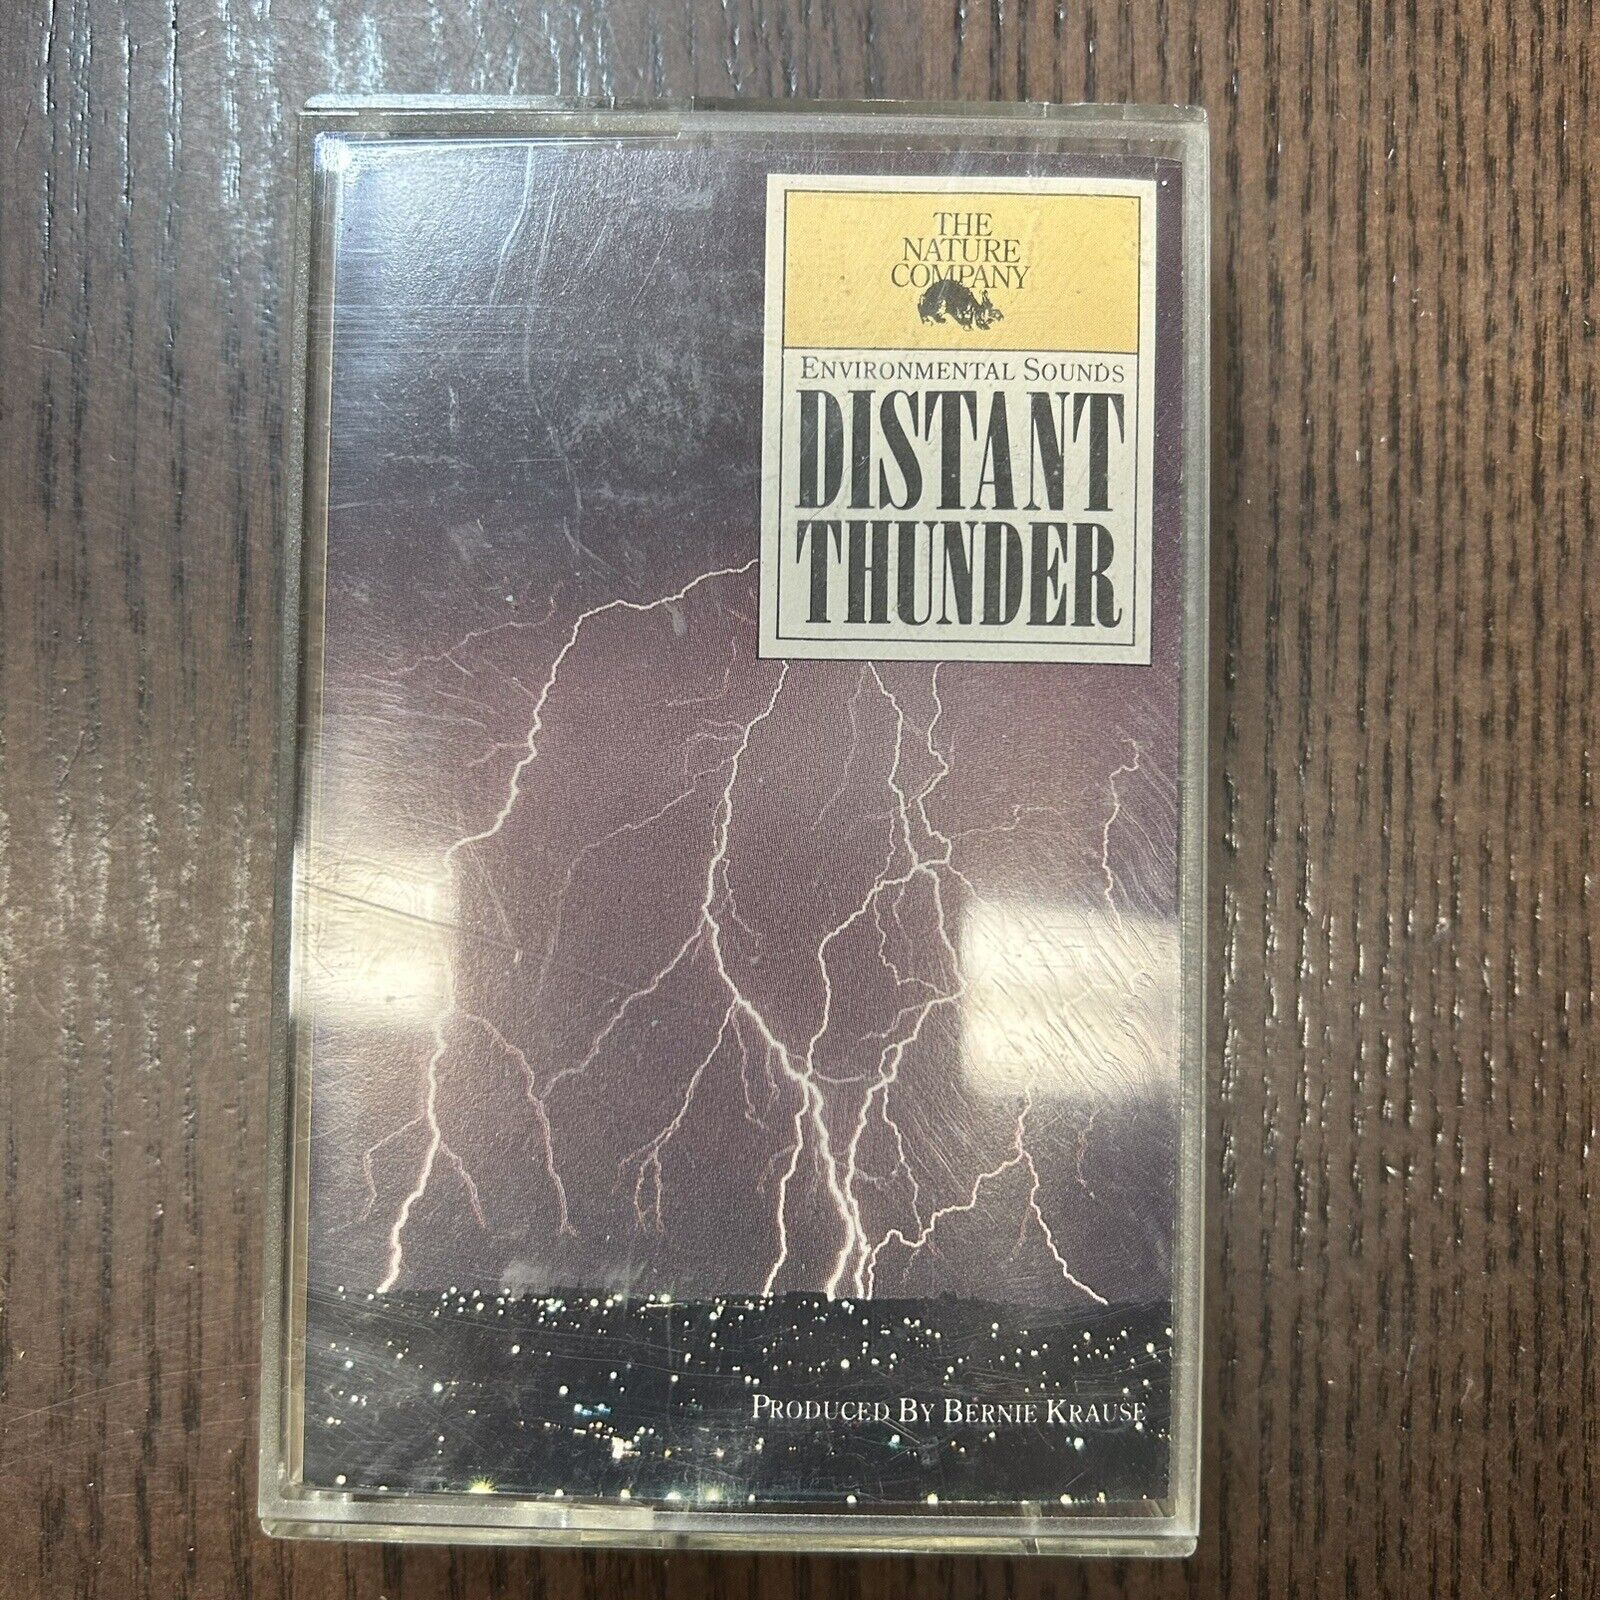 Distant Thunder Environmental Sounds Cassette Tape 1988 The Nature Company